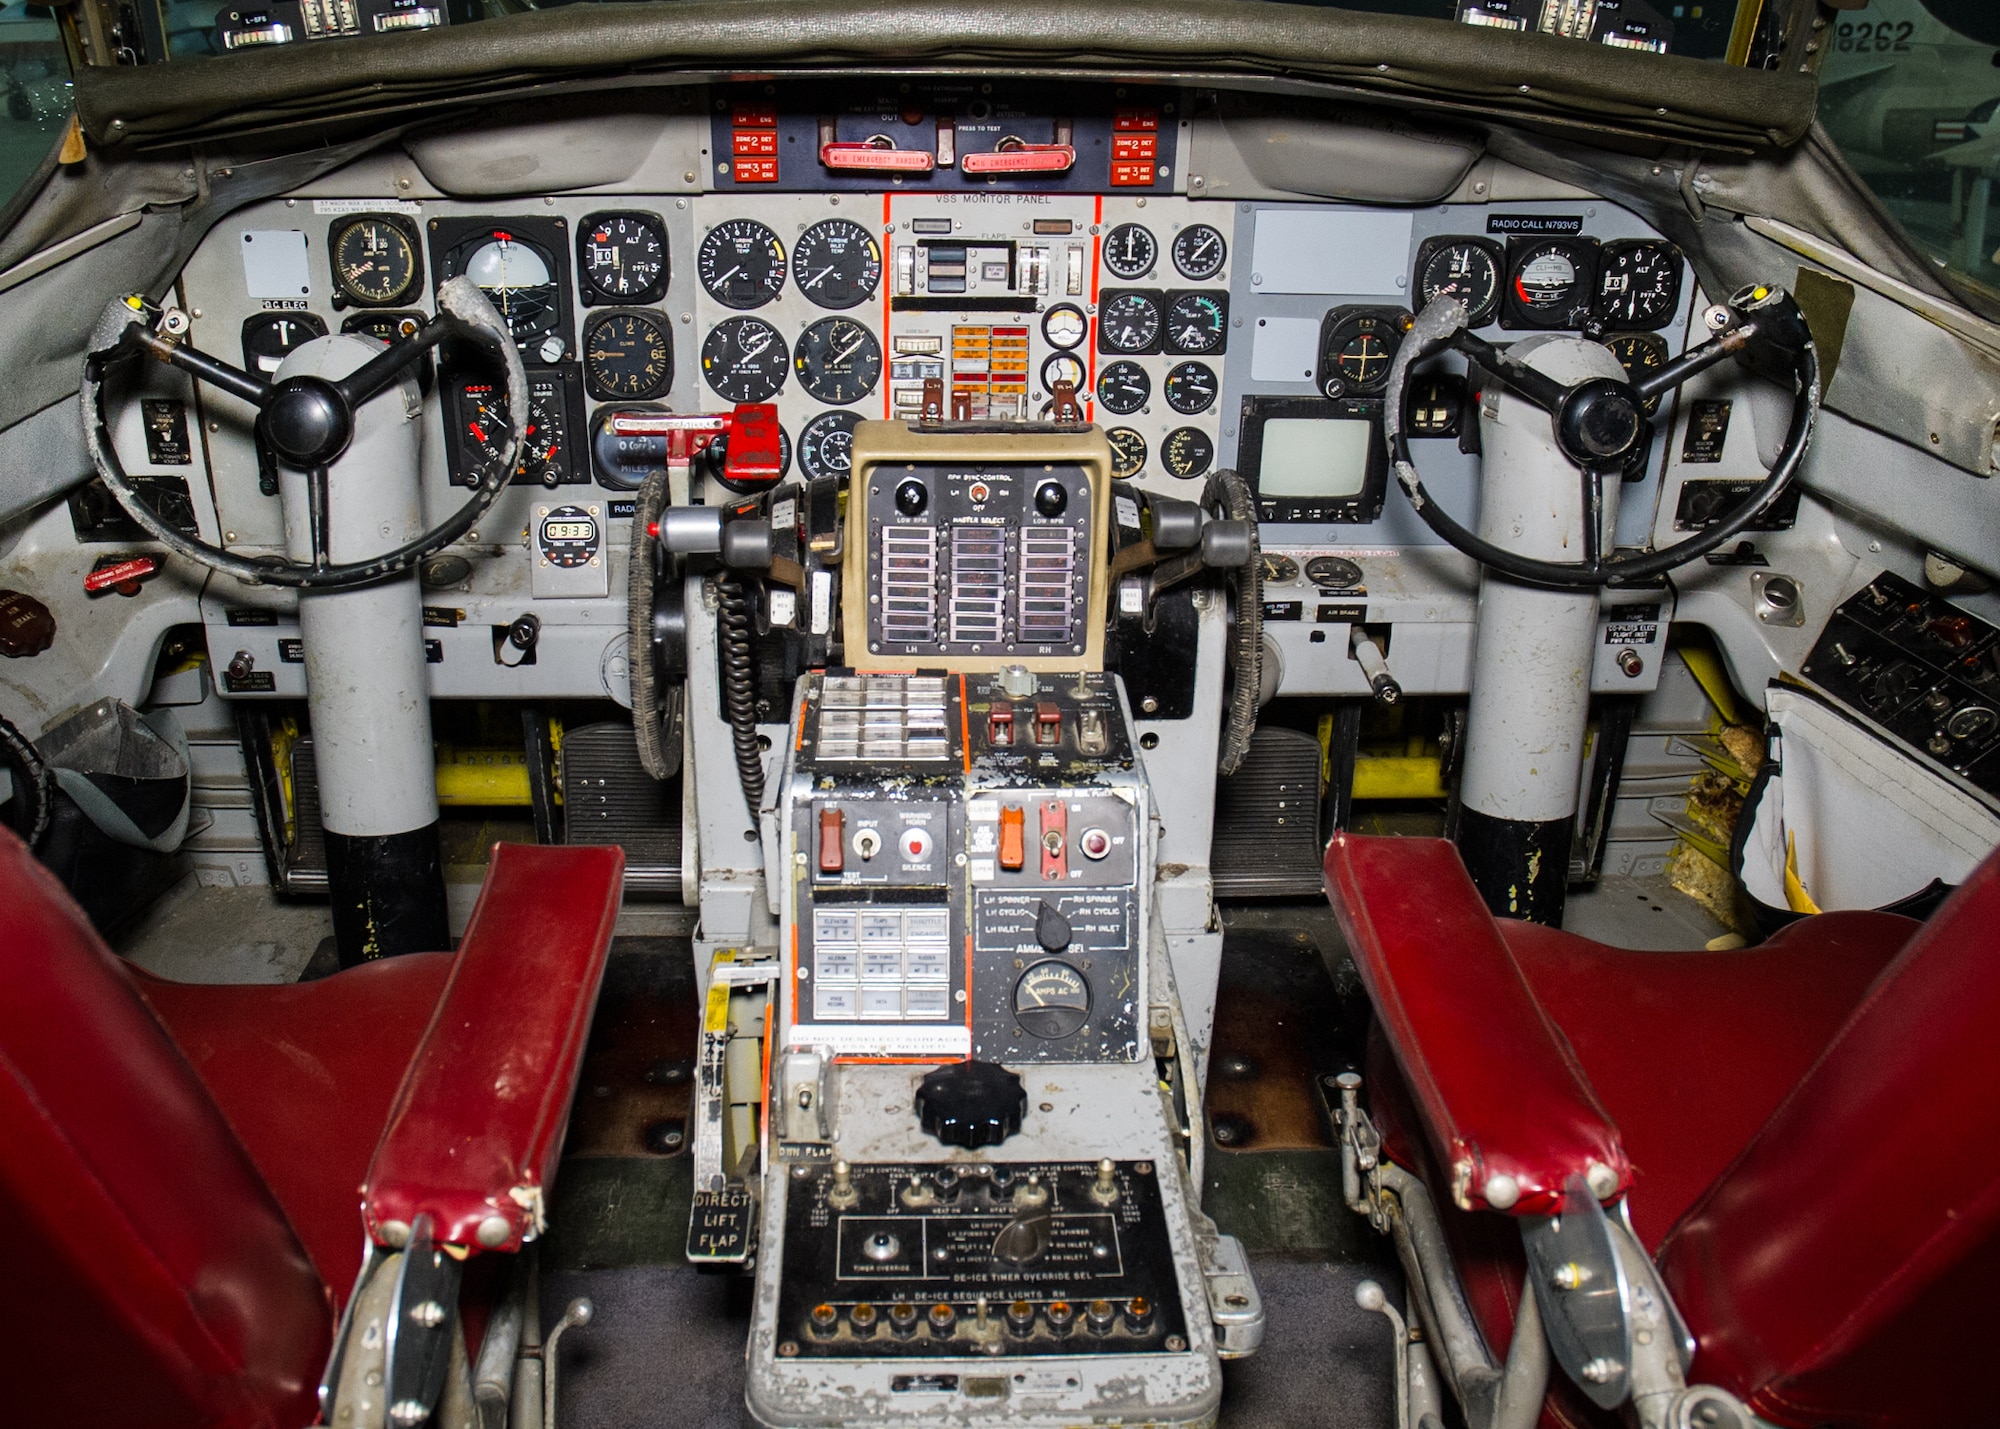 DAYTON, Ohio -- Convair NC-131H Total In-Flight Simulator (TIFS) cockpit view in the Research & Development Gallery at the National Museum of the United States Air Force. (U.S. Air Force photo by Ken LaRock)
